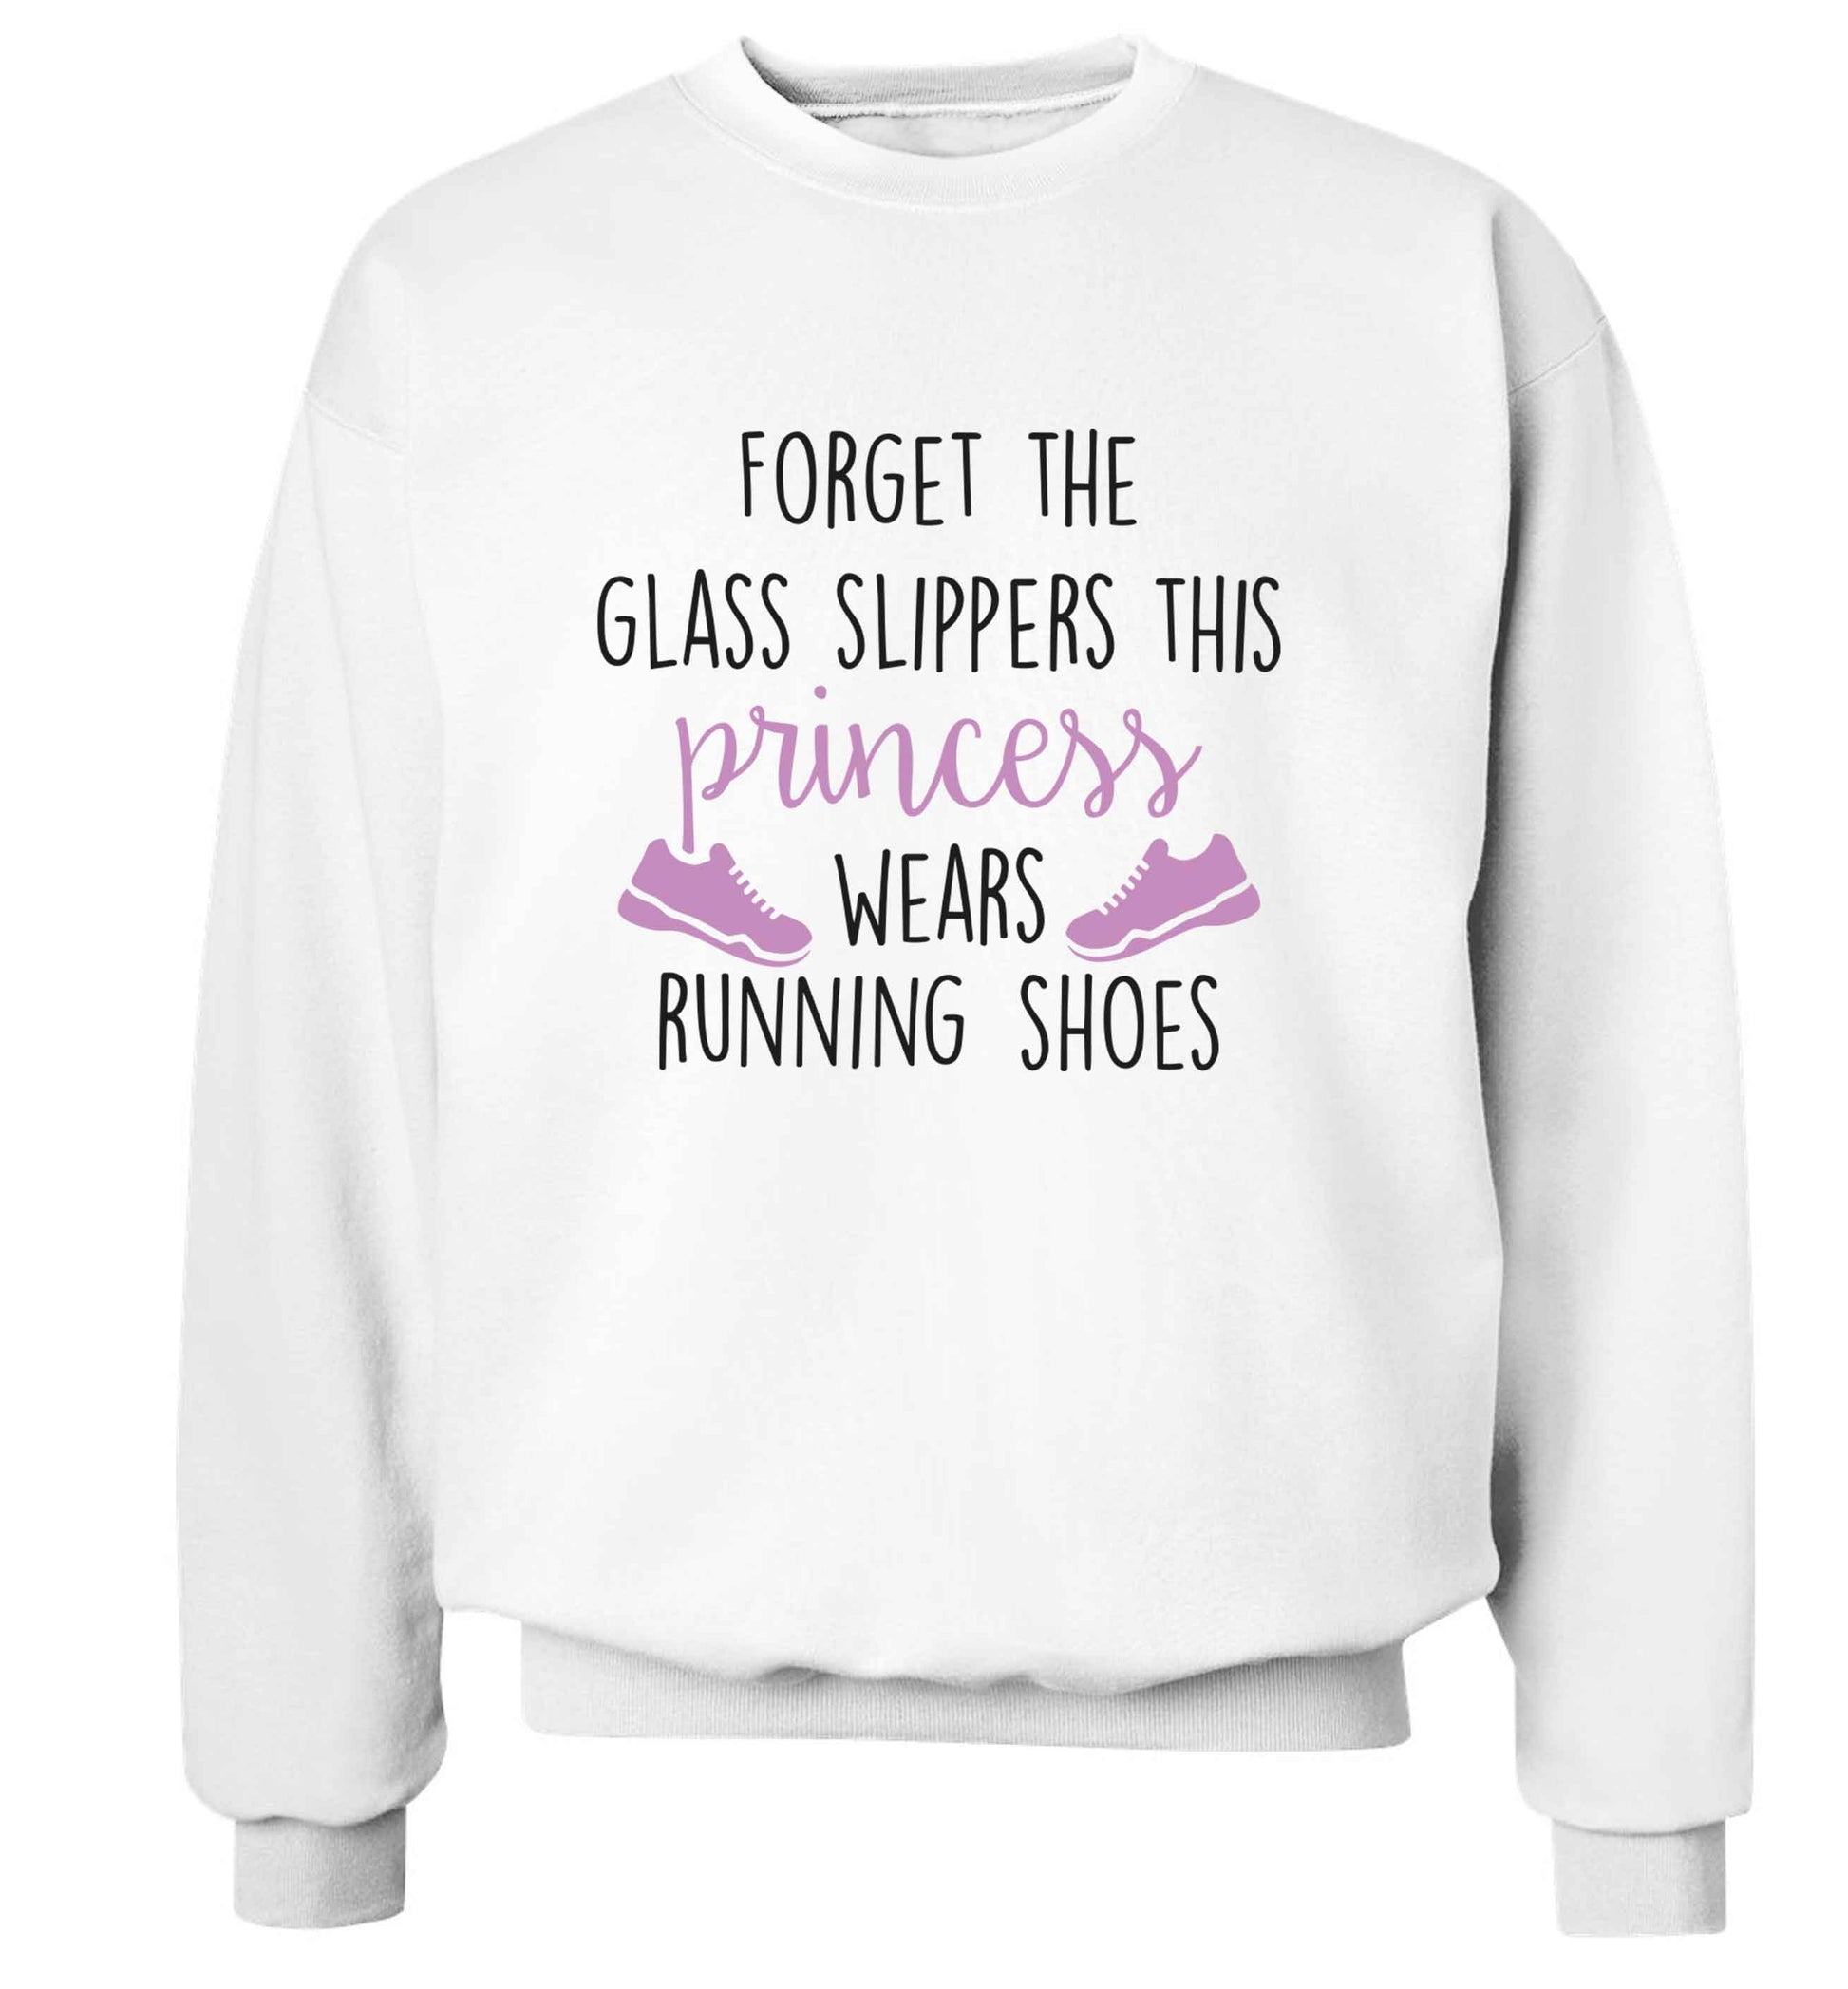 Forget the glass slippers this princess wears running shoes adult's unisex white sweater 2XL